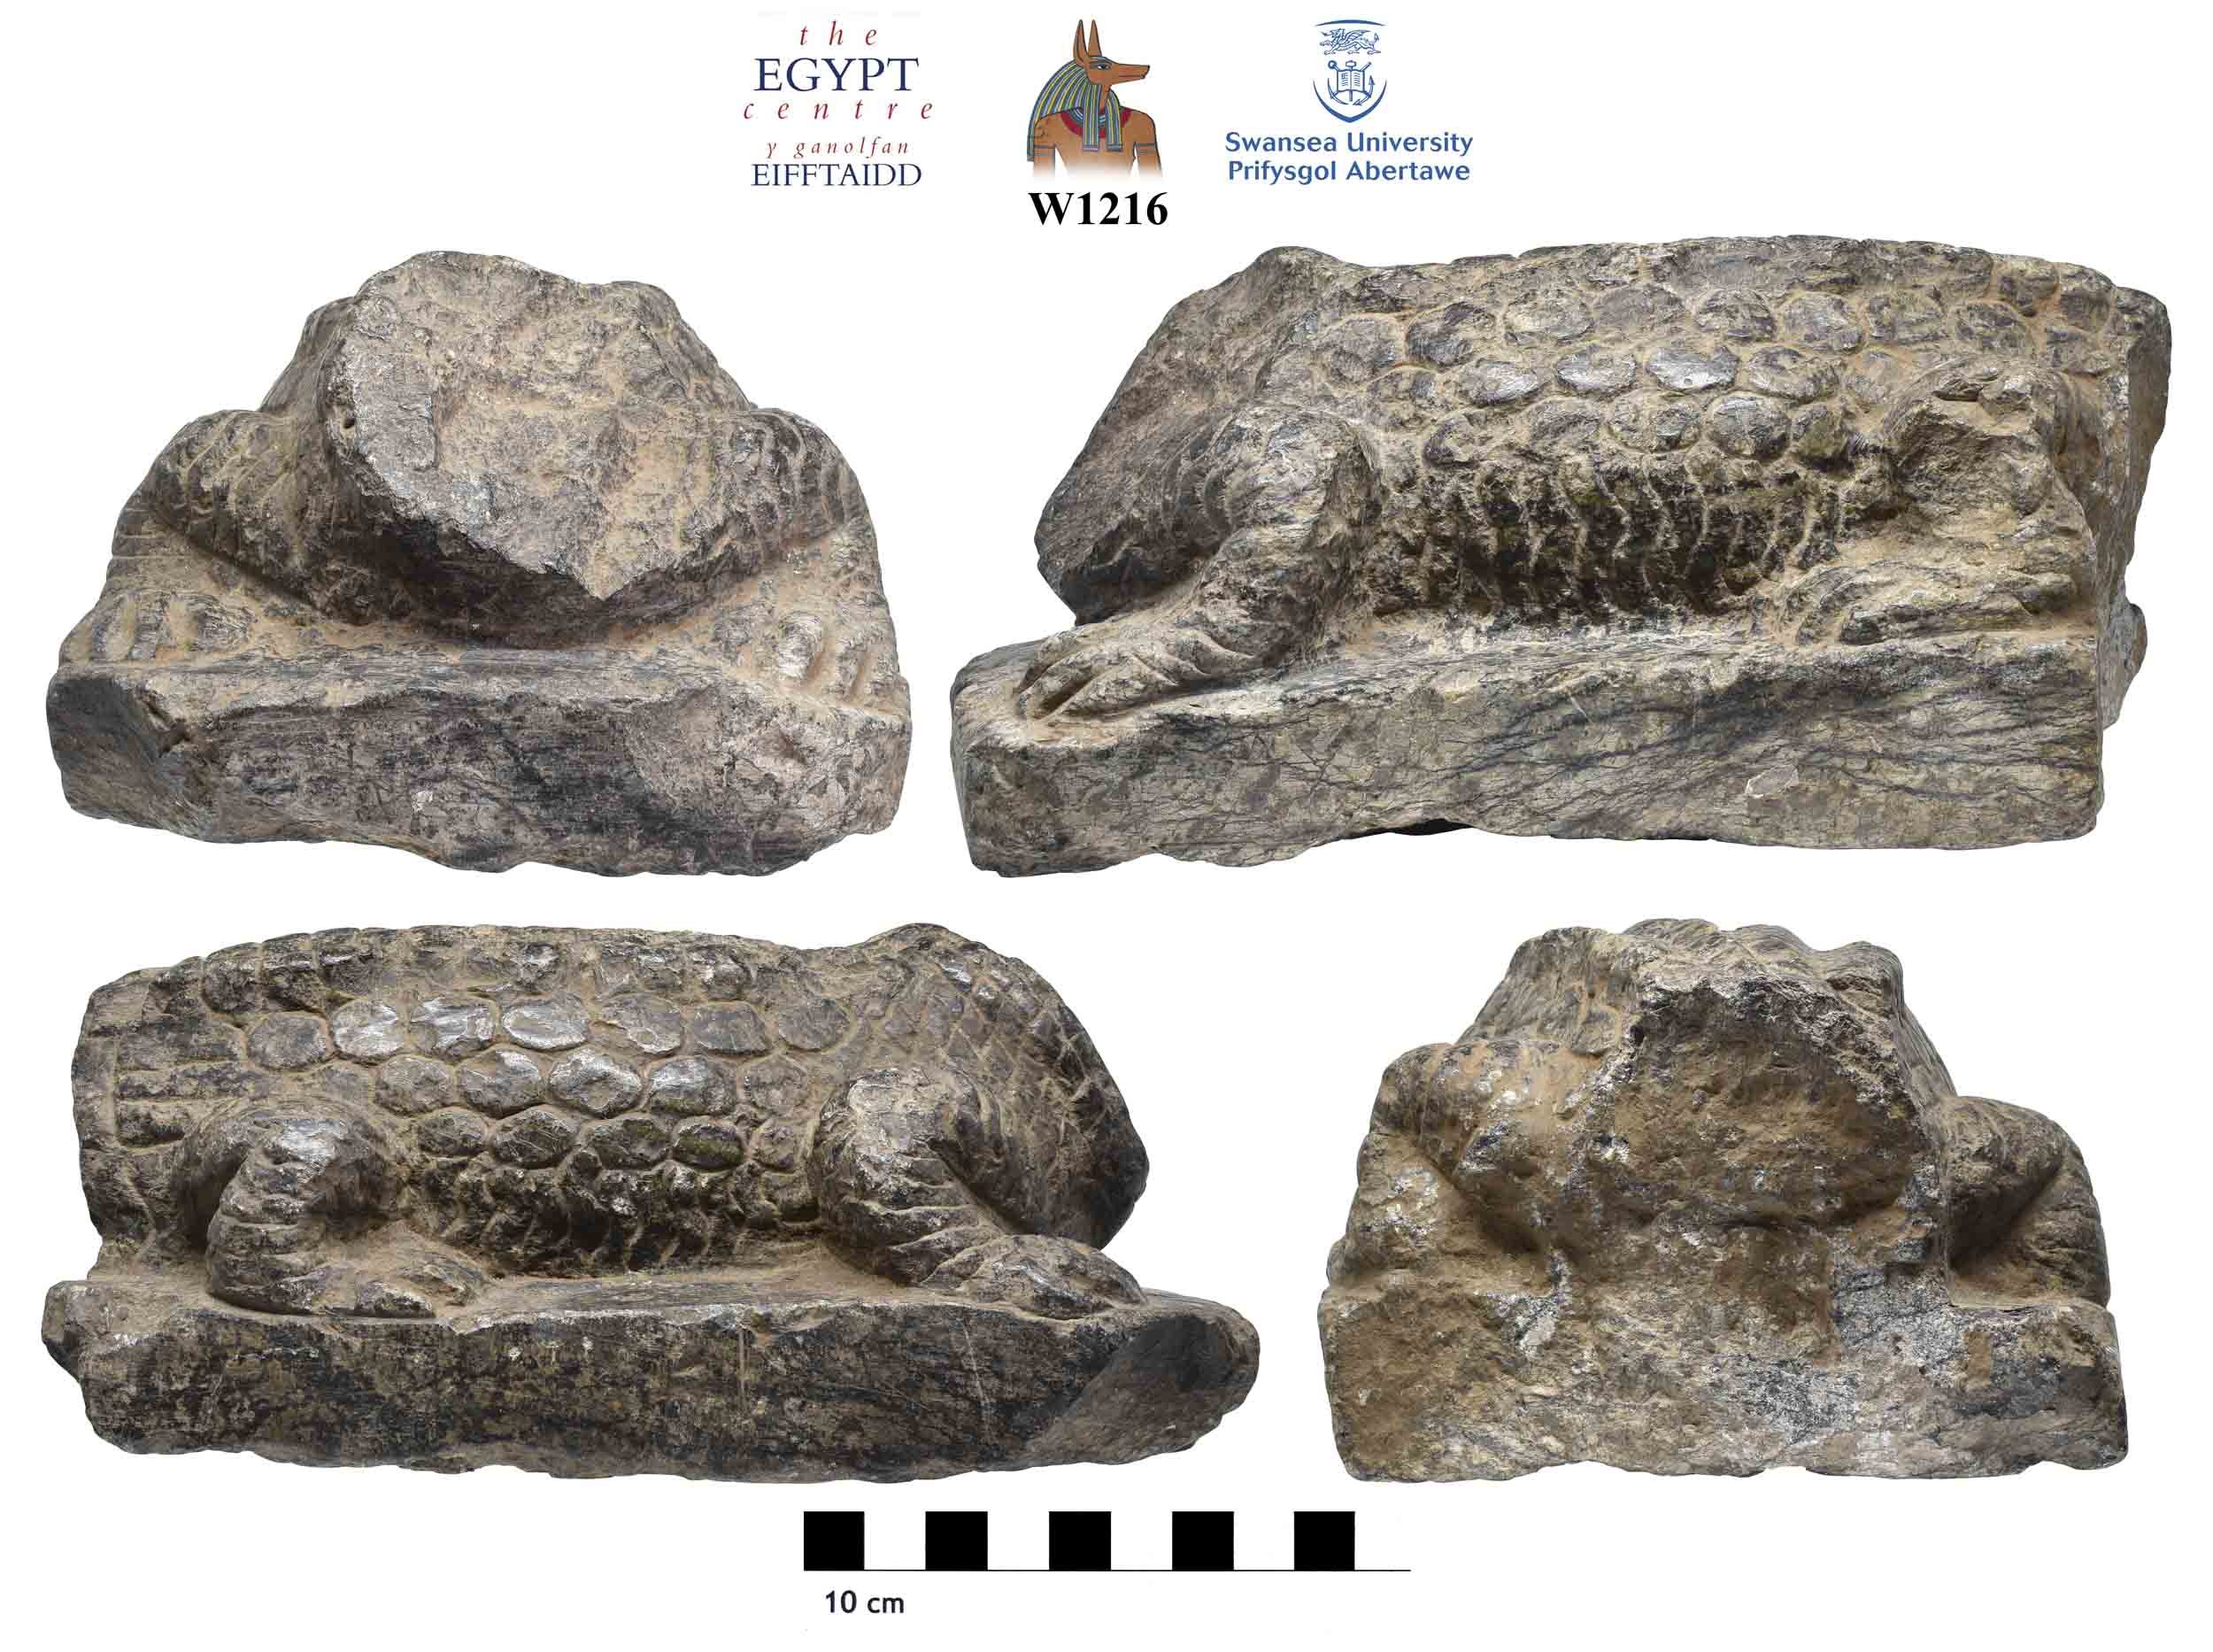 Image for: Fragment of a stone statue of a crocodile